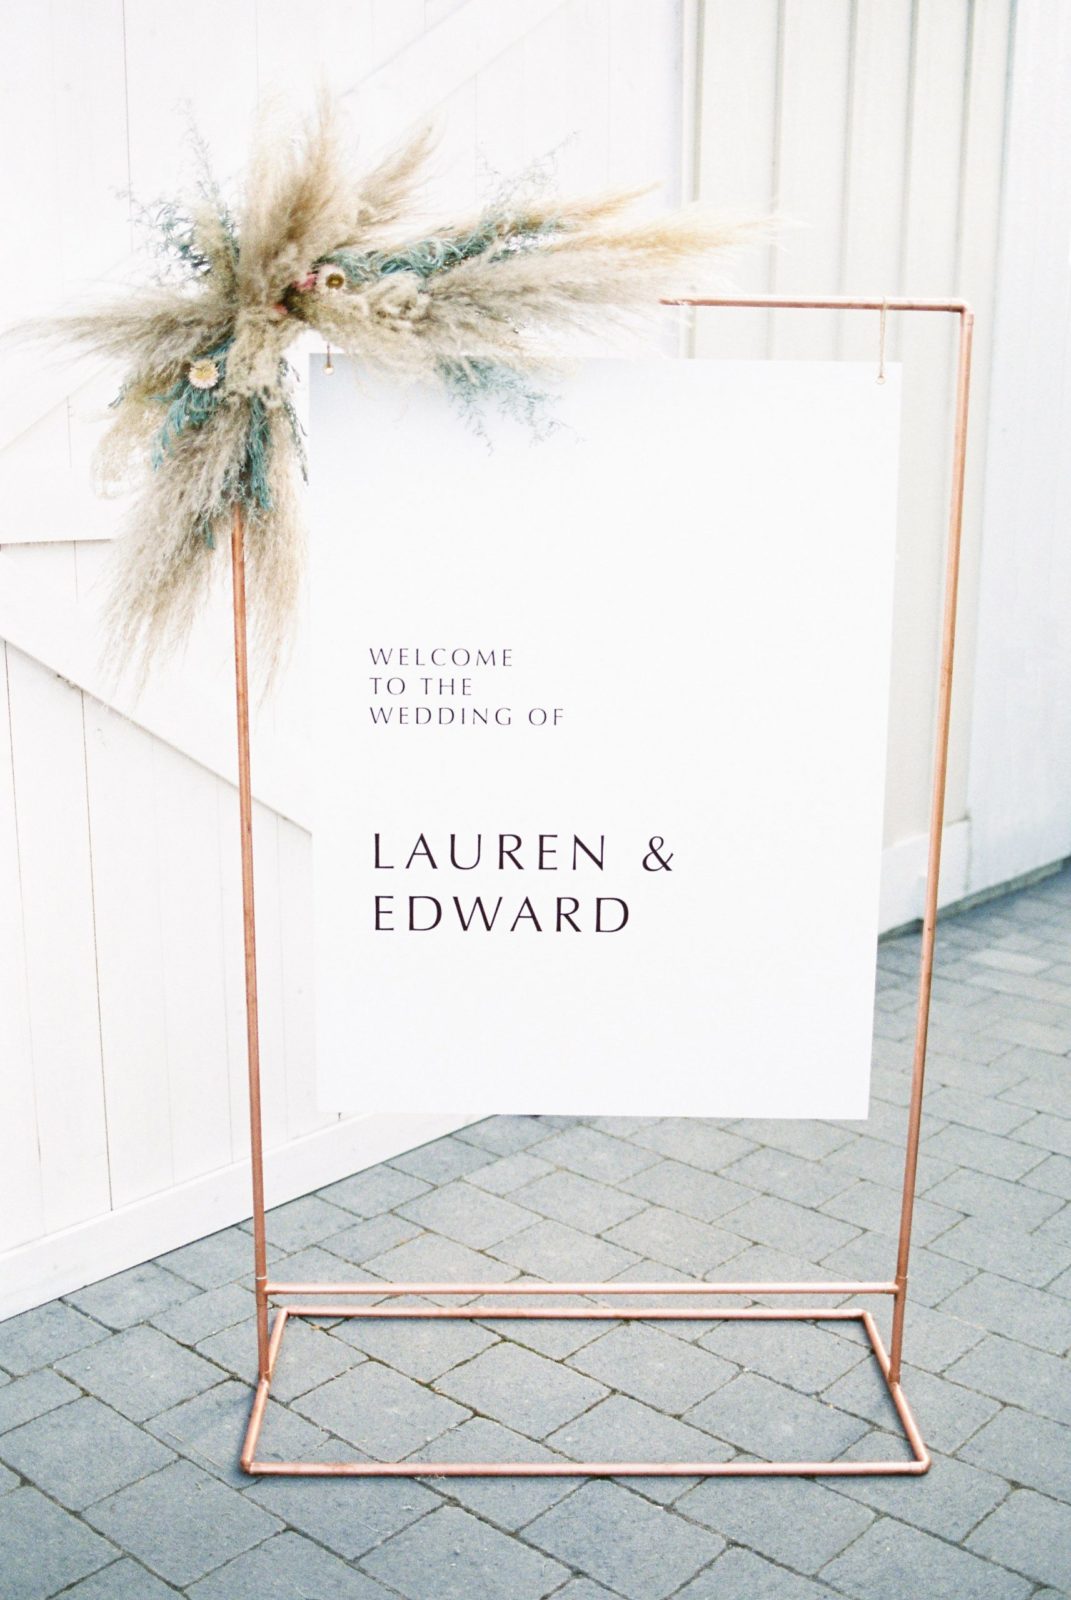 Modern wedding sign in white and copper welcoming guests to an Okanagan wedding ceremony